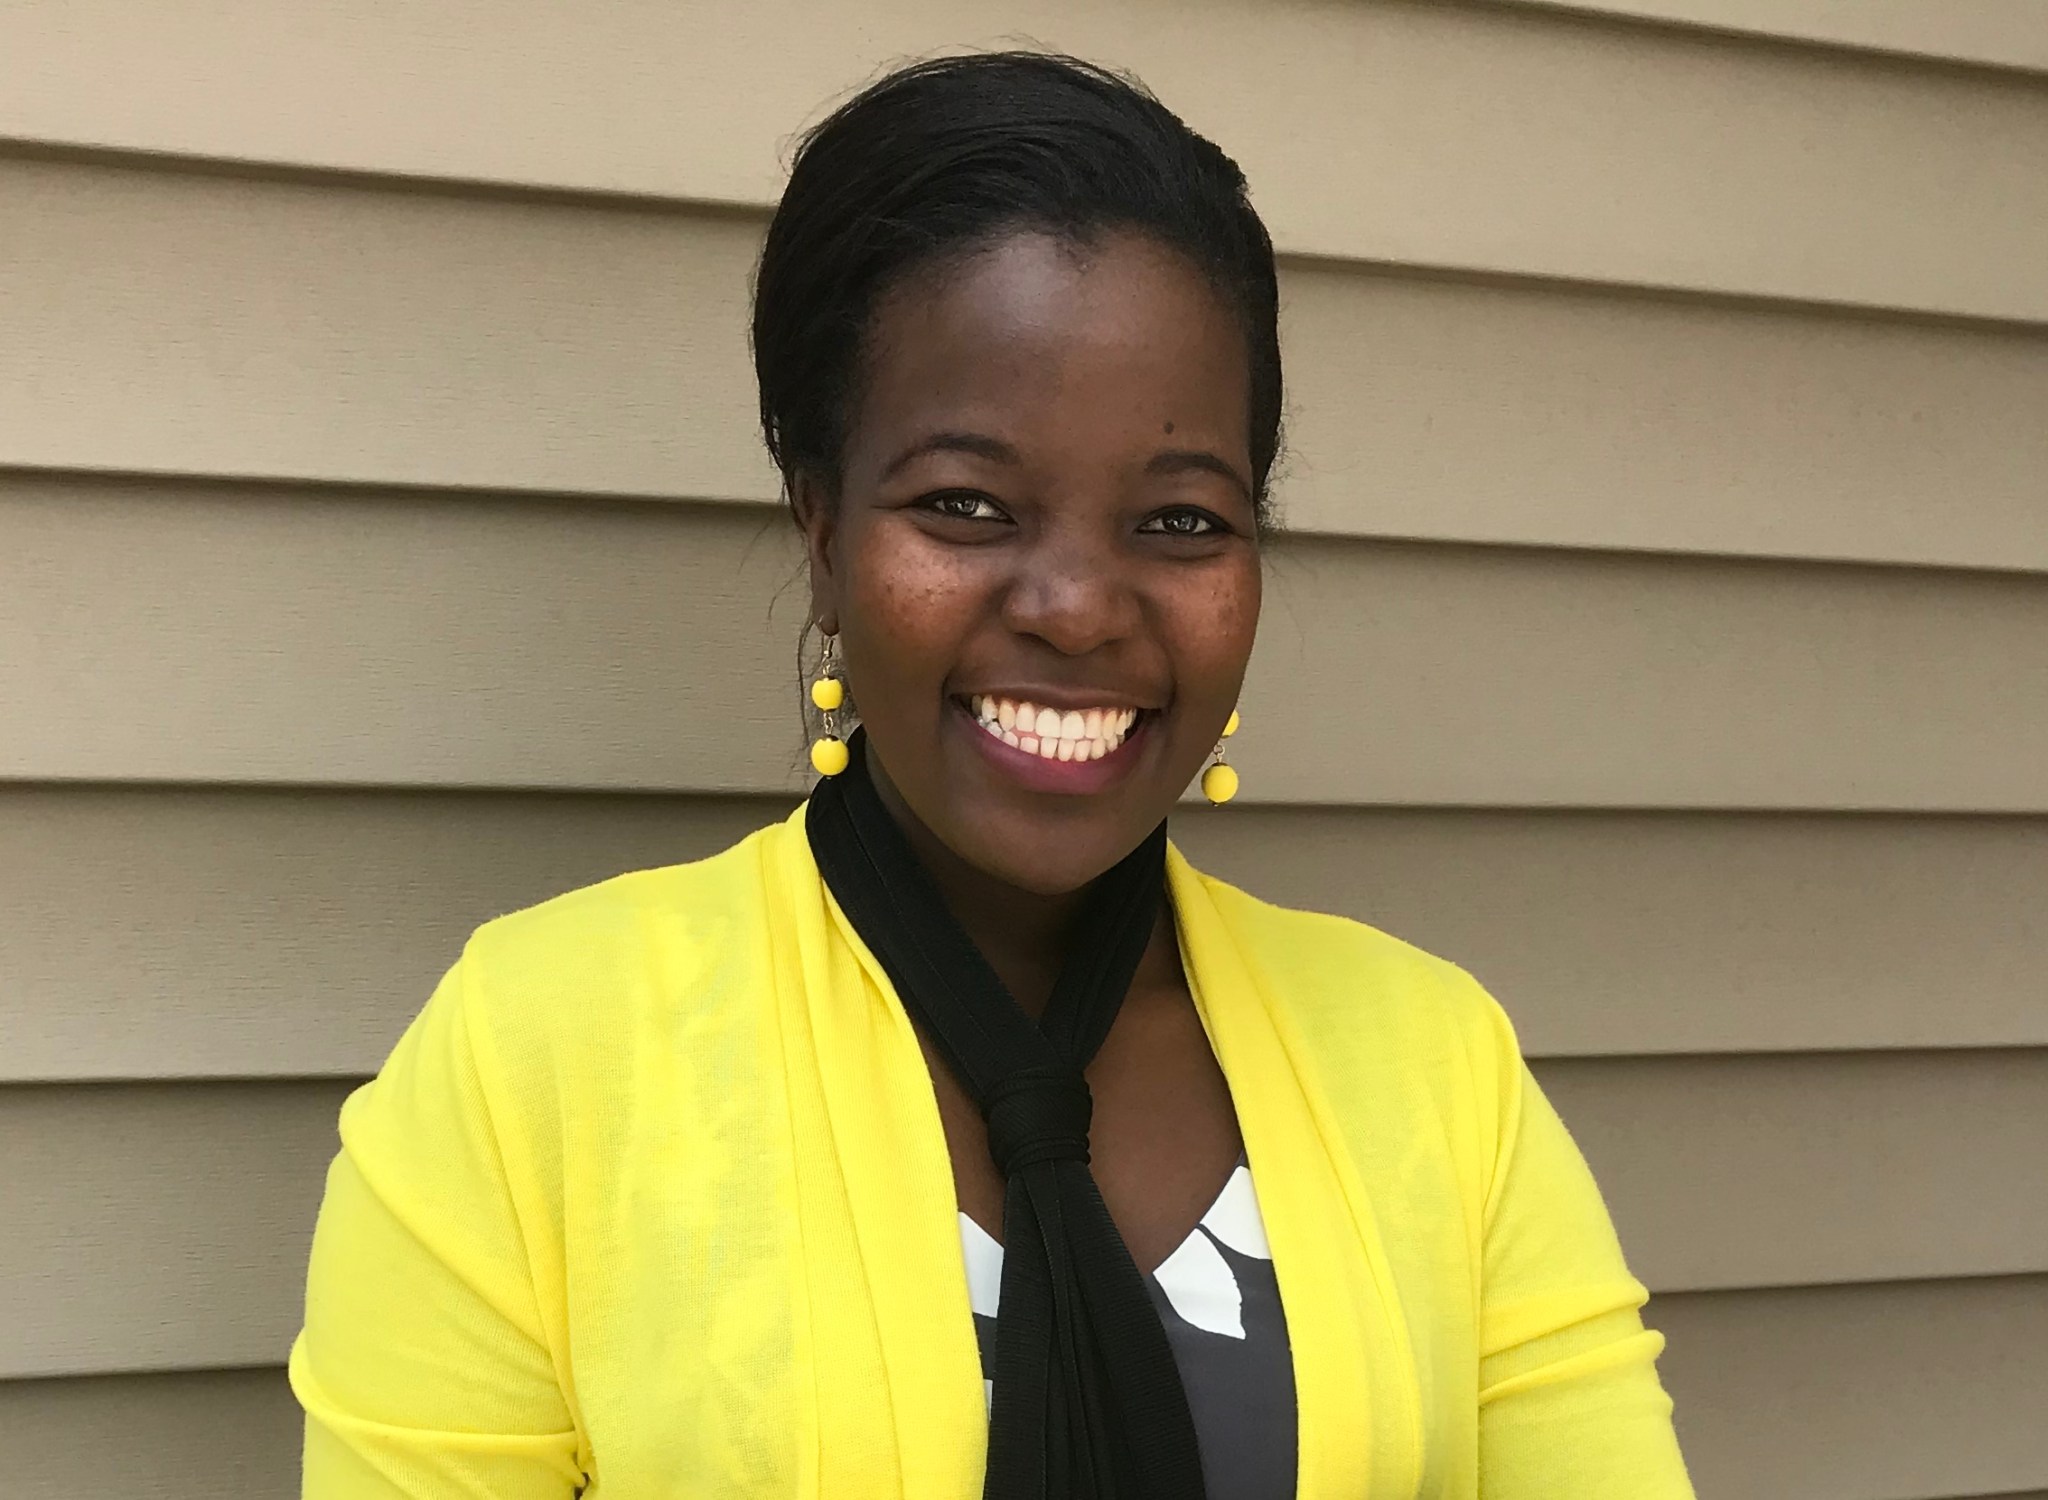 Dr. Alinda Mashiku, a Black woman, stands smiling against a tan wall. She is wearing a bright yellow sweater over a black and white shirt, a black scarf, and yellow earrings.